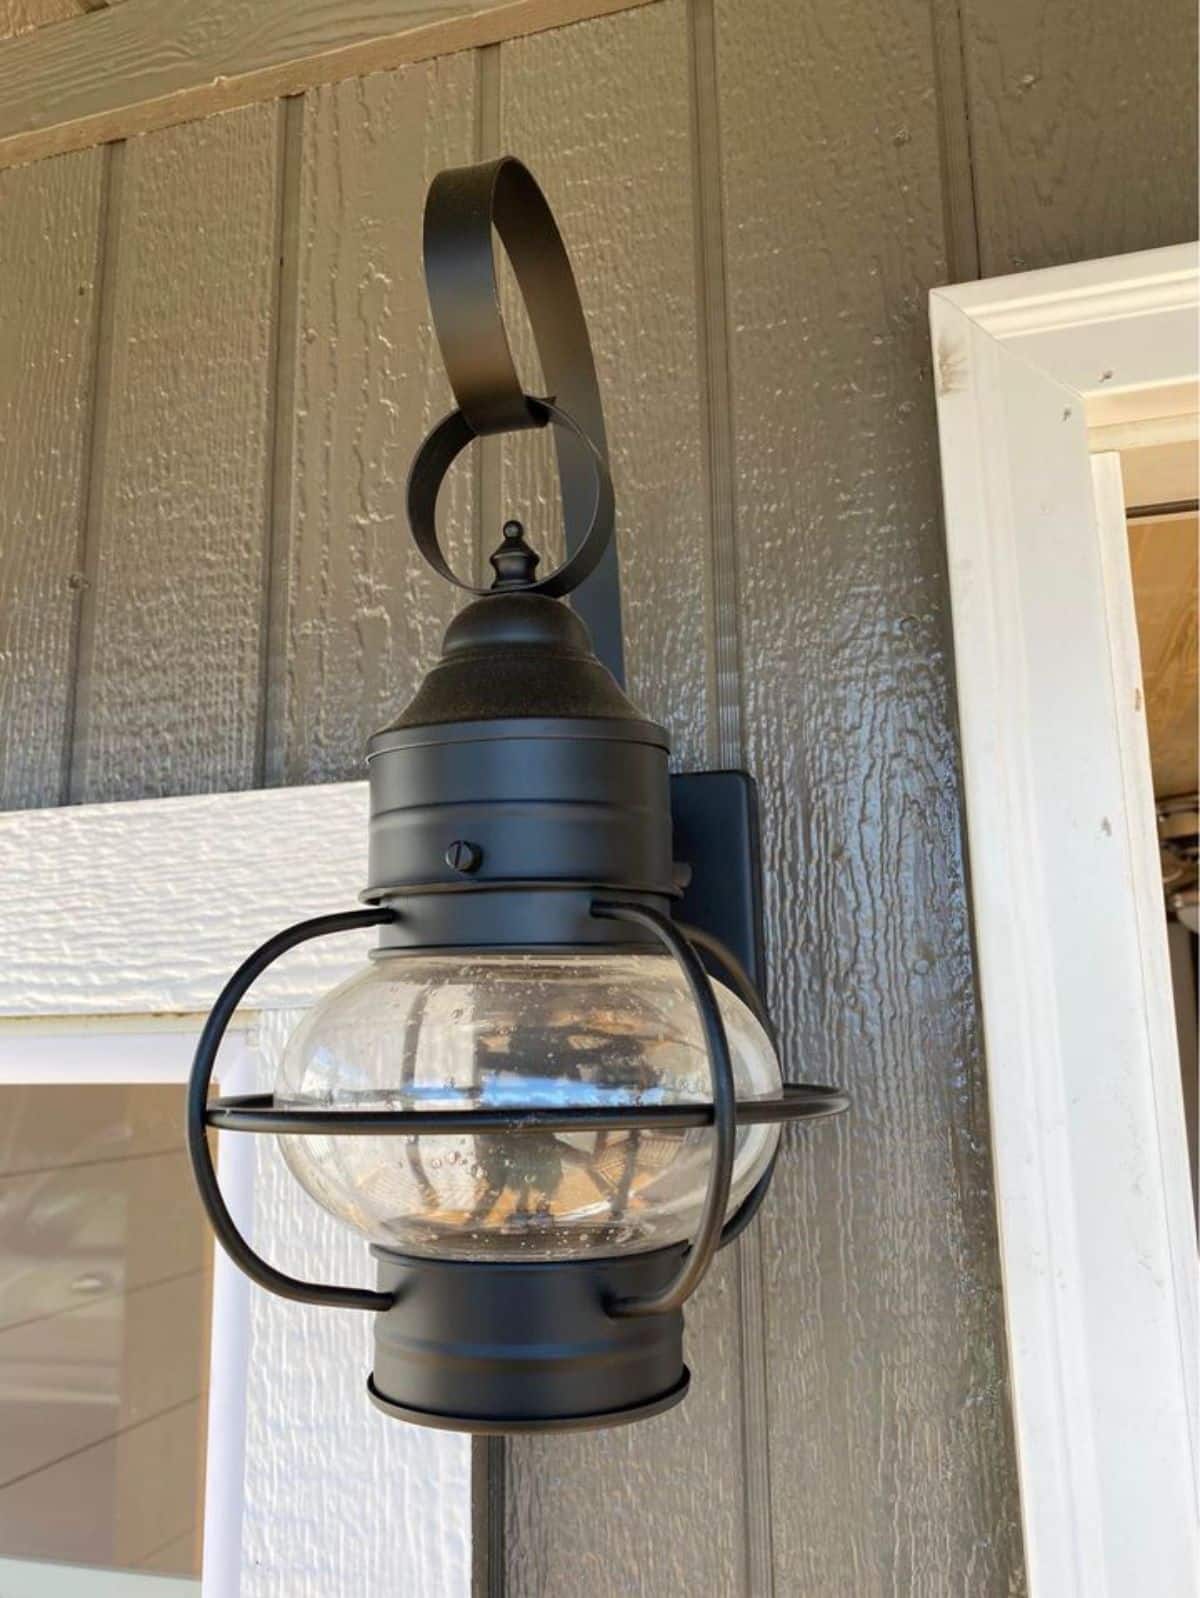 Stunning porch light on the porch makes it even more beautiful during night